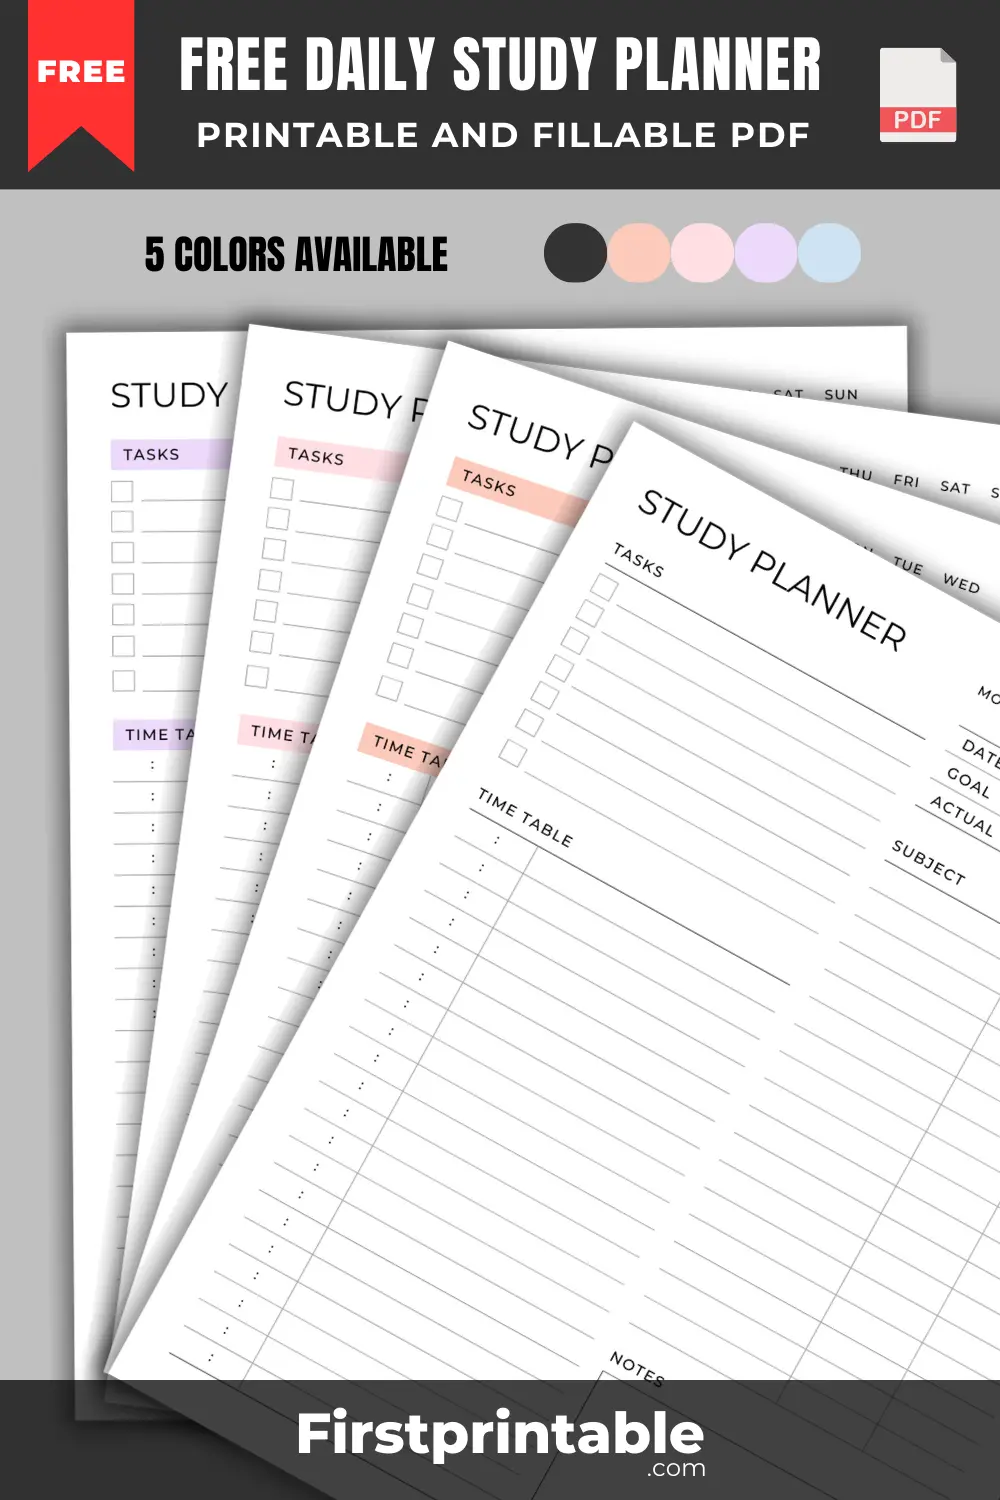 Free Printable and Fillable Daily study planner